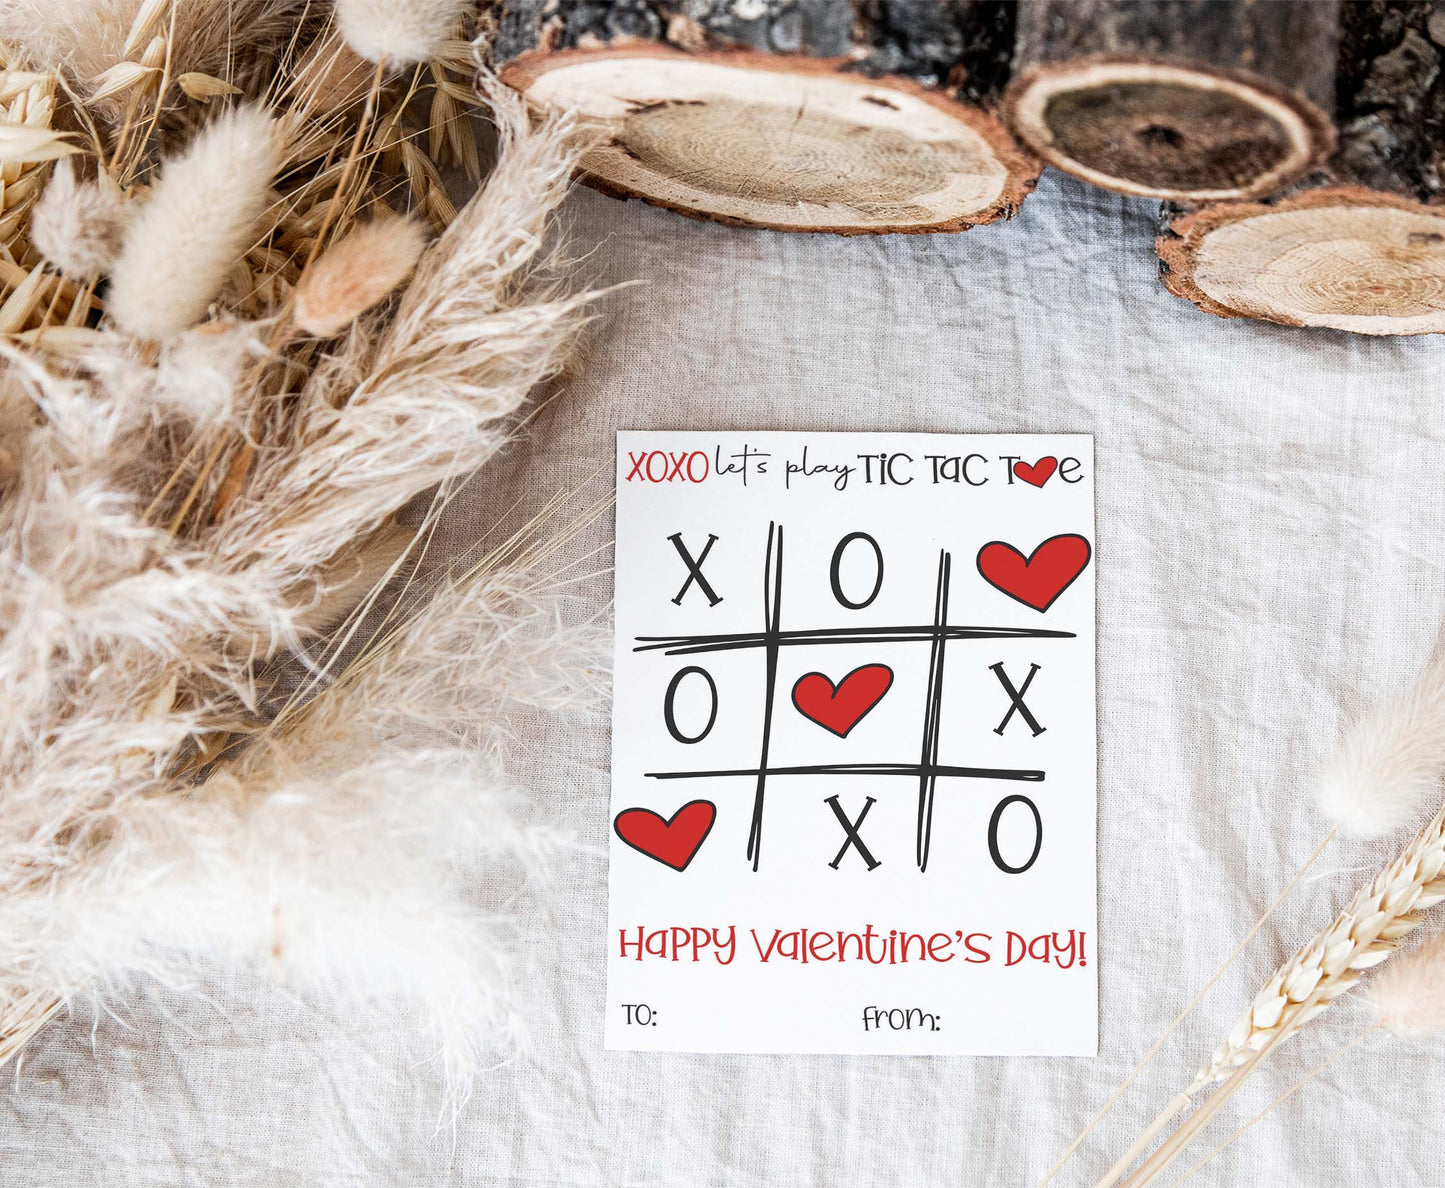 XOXO let's play Tic Tac Toe Cookie Card | Happy Valentines Printable Cards - 119